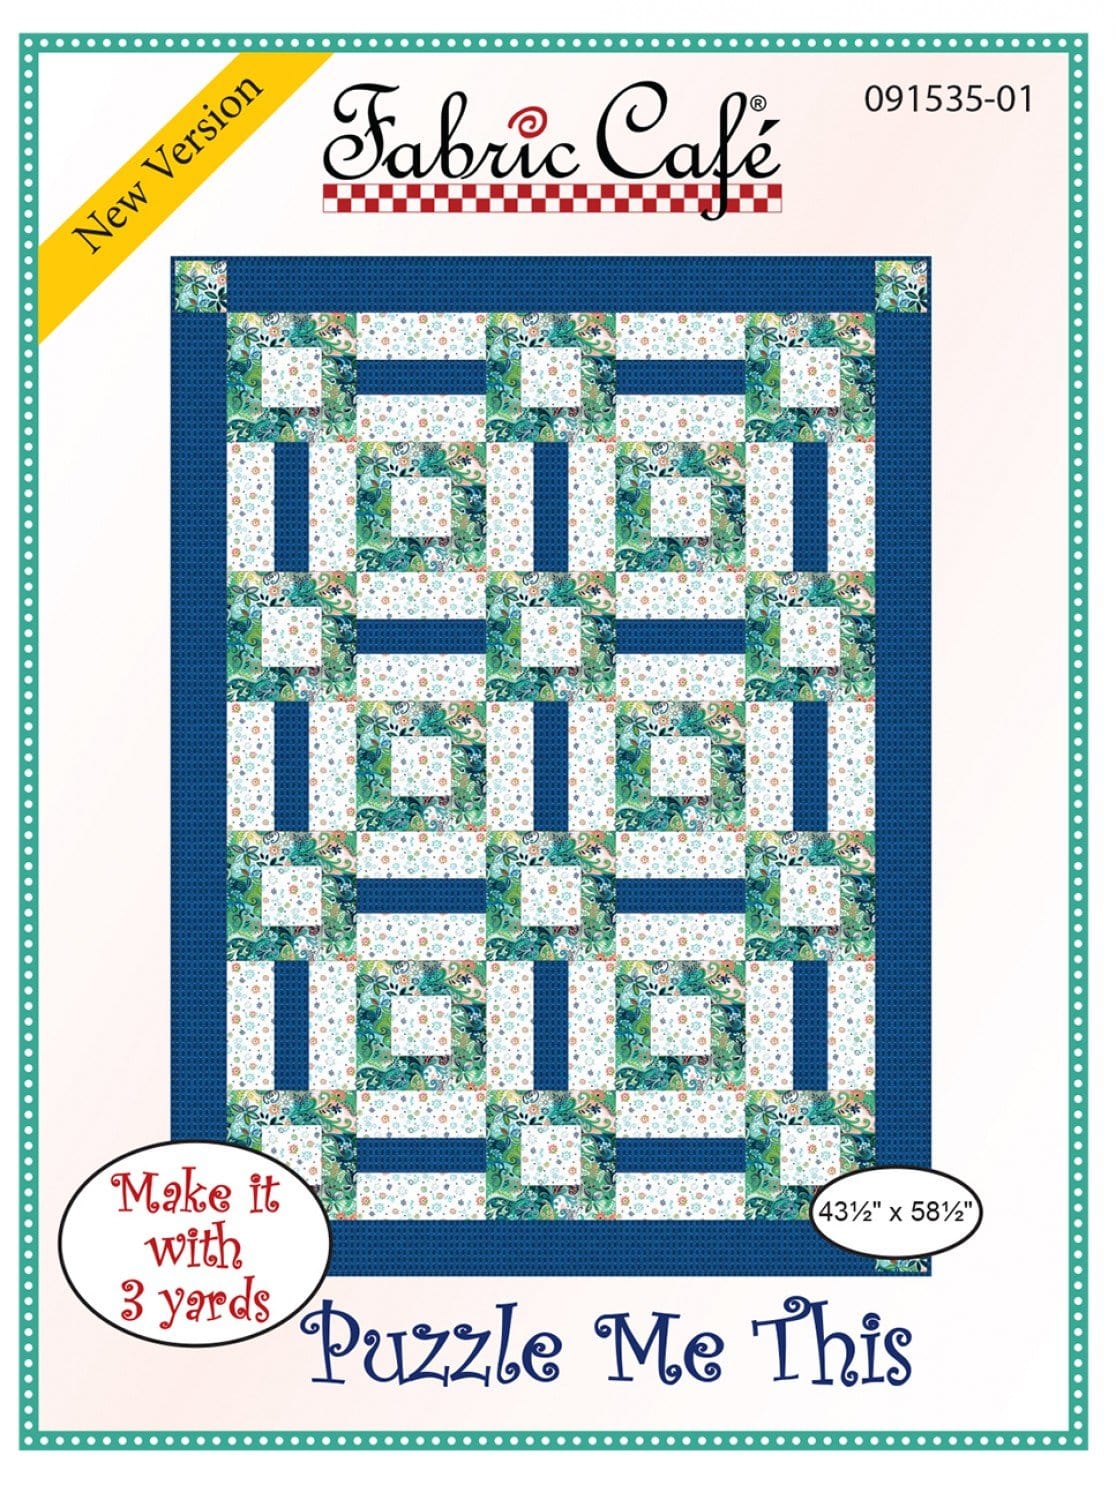 Puzzle Me This Pattern - 3-yard Quilt - Fabric Cafe